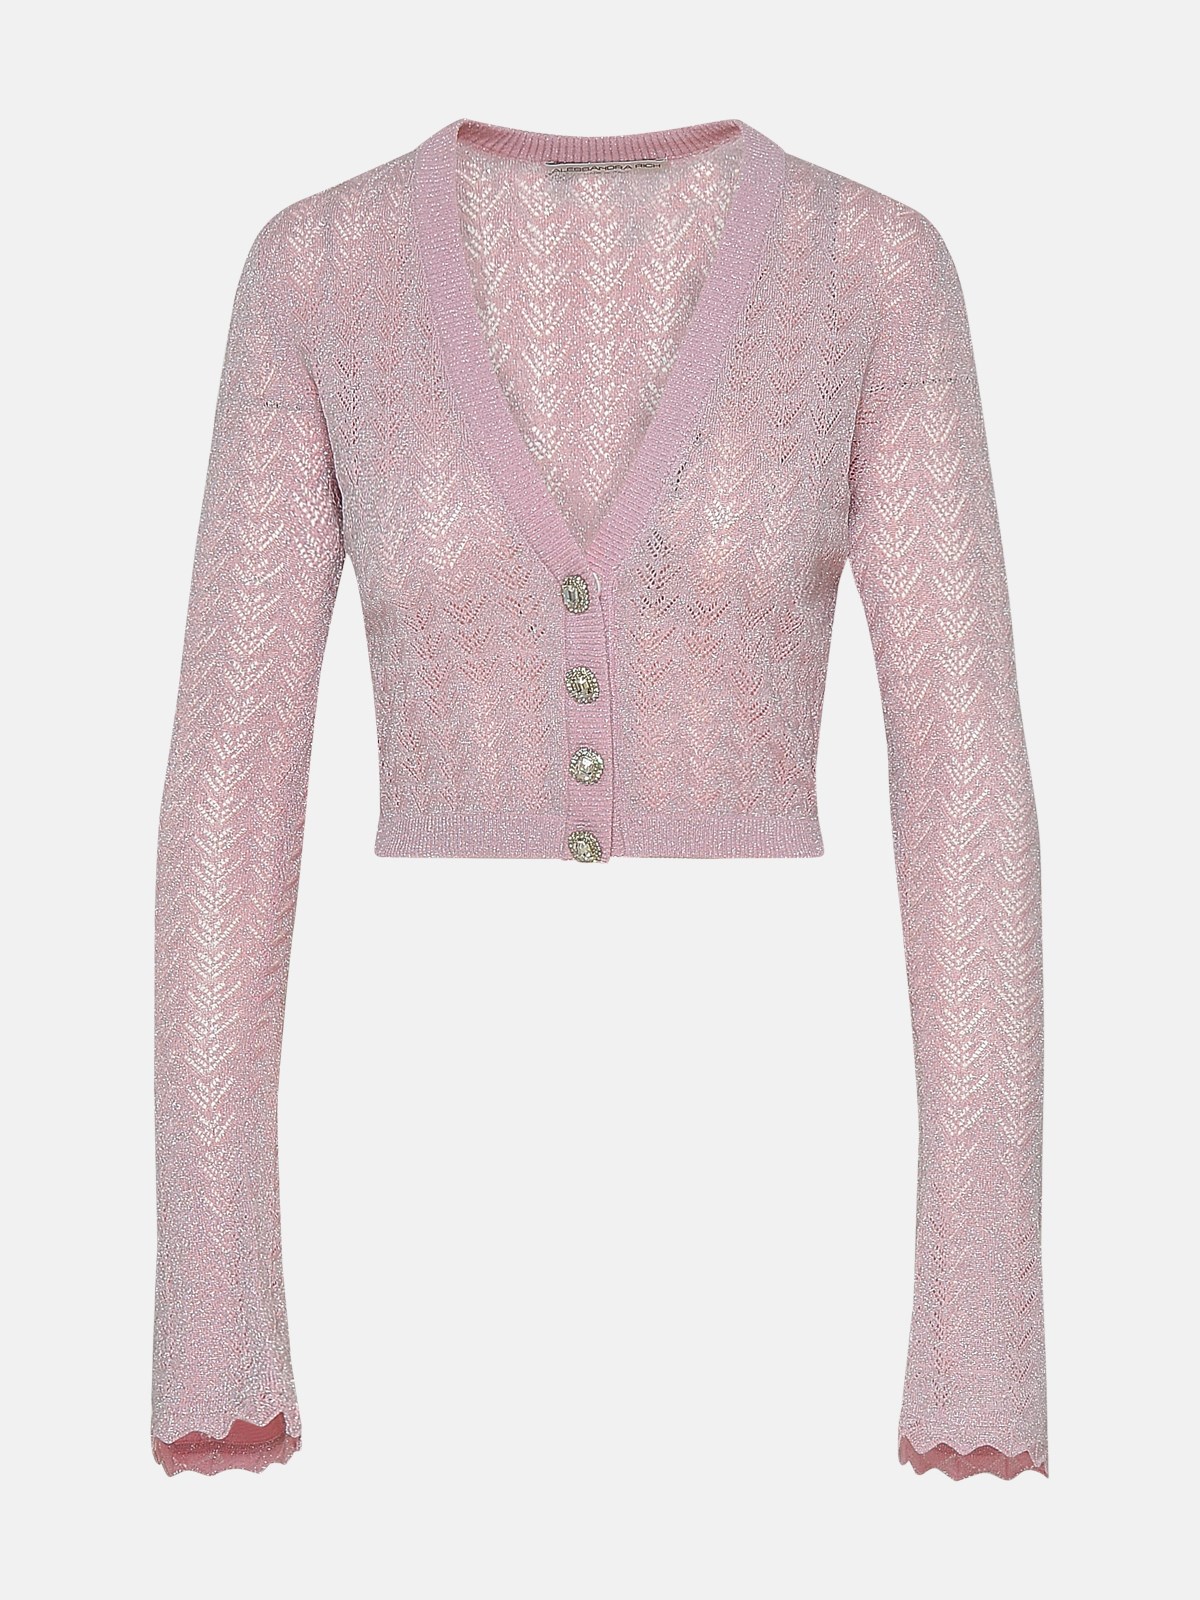 Alessandra Rich Rose Knit Cardigan In Pink